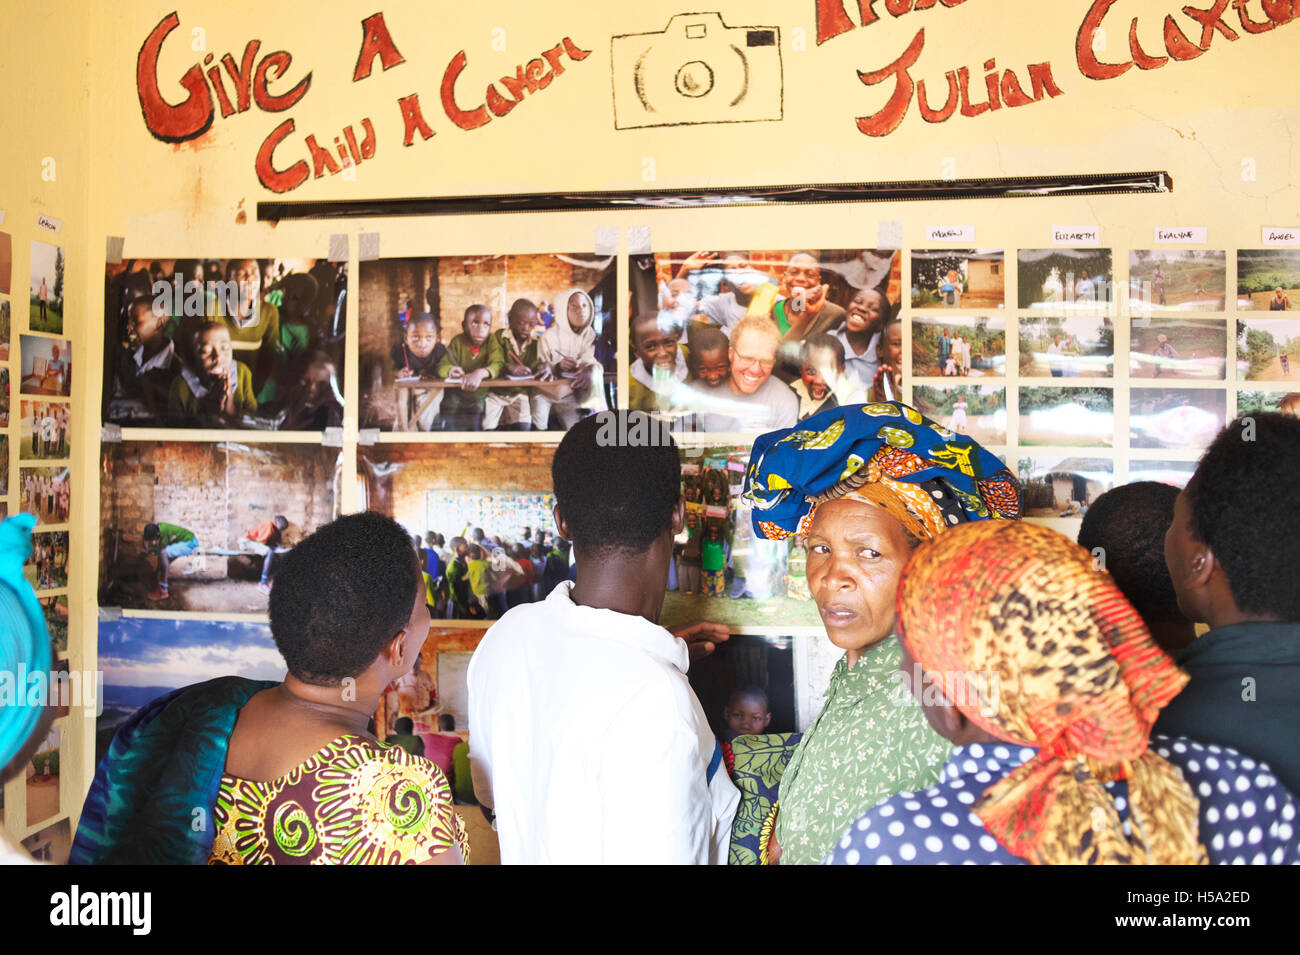 The school opens up during the Exhibition in rural Uganda where the local community attends to view photos Stock Photo